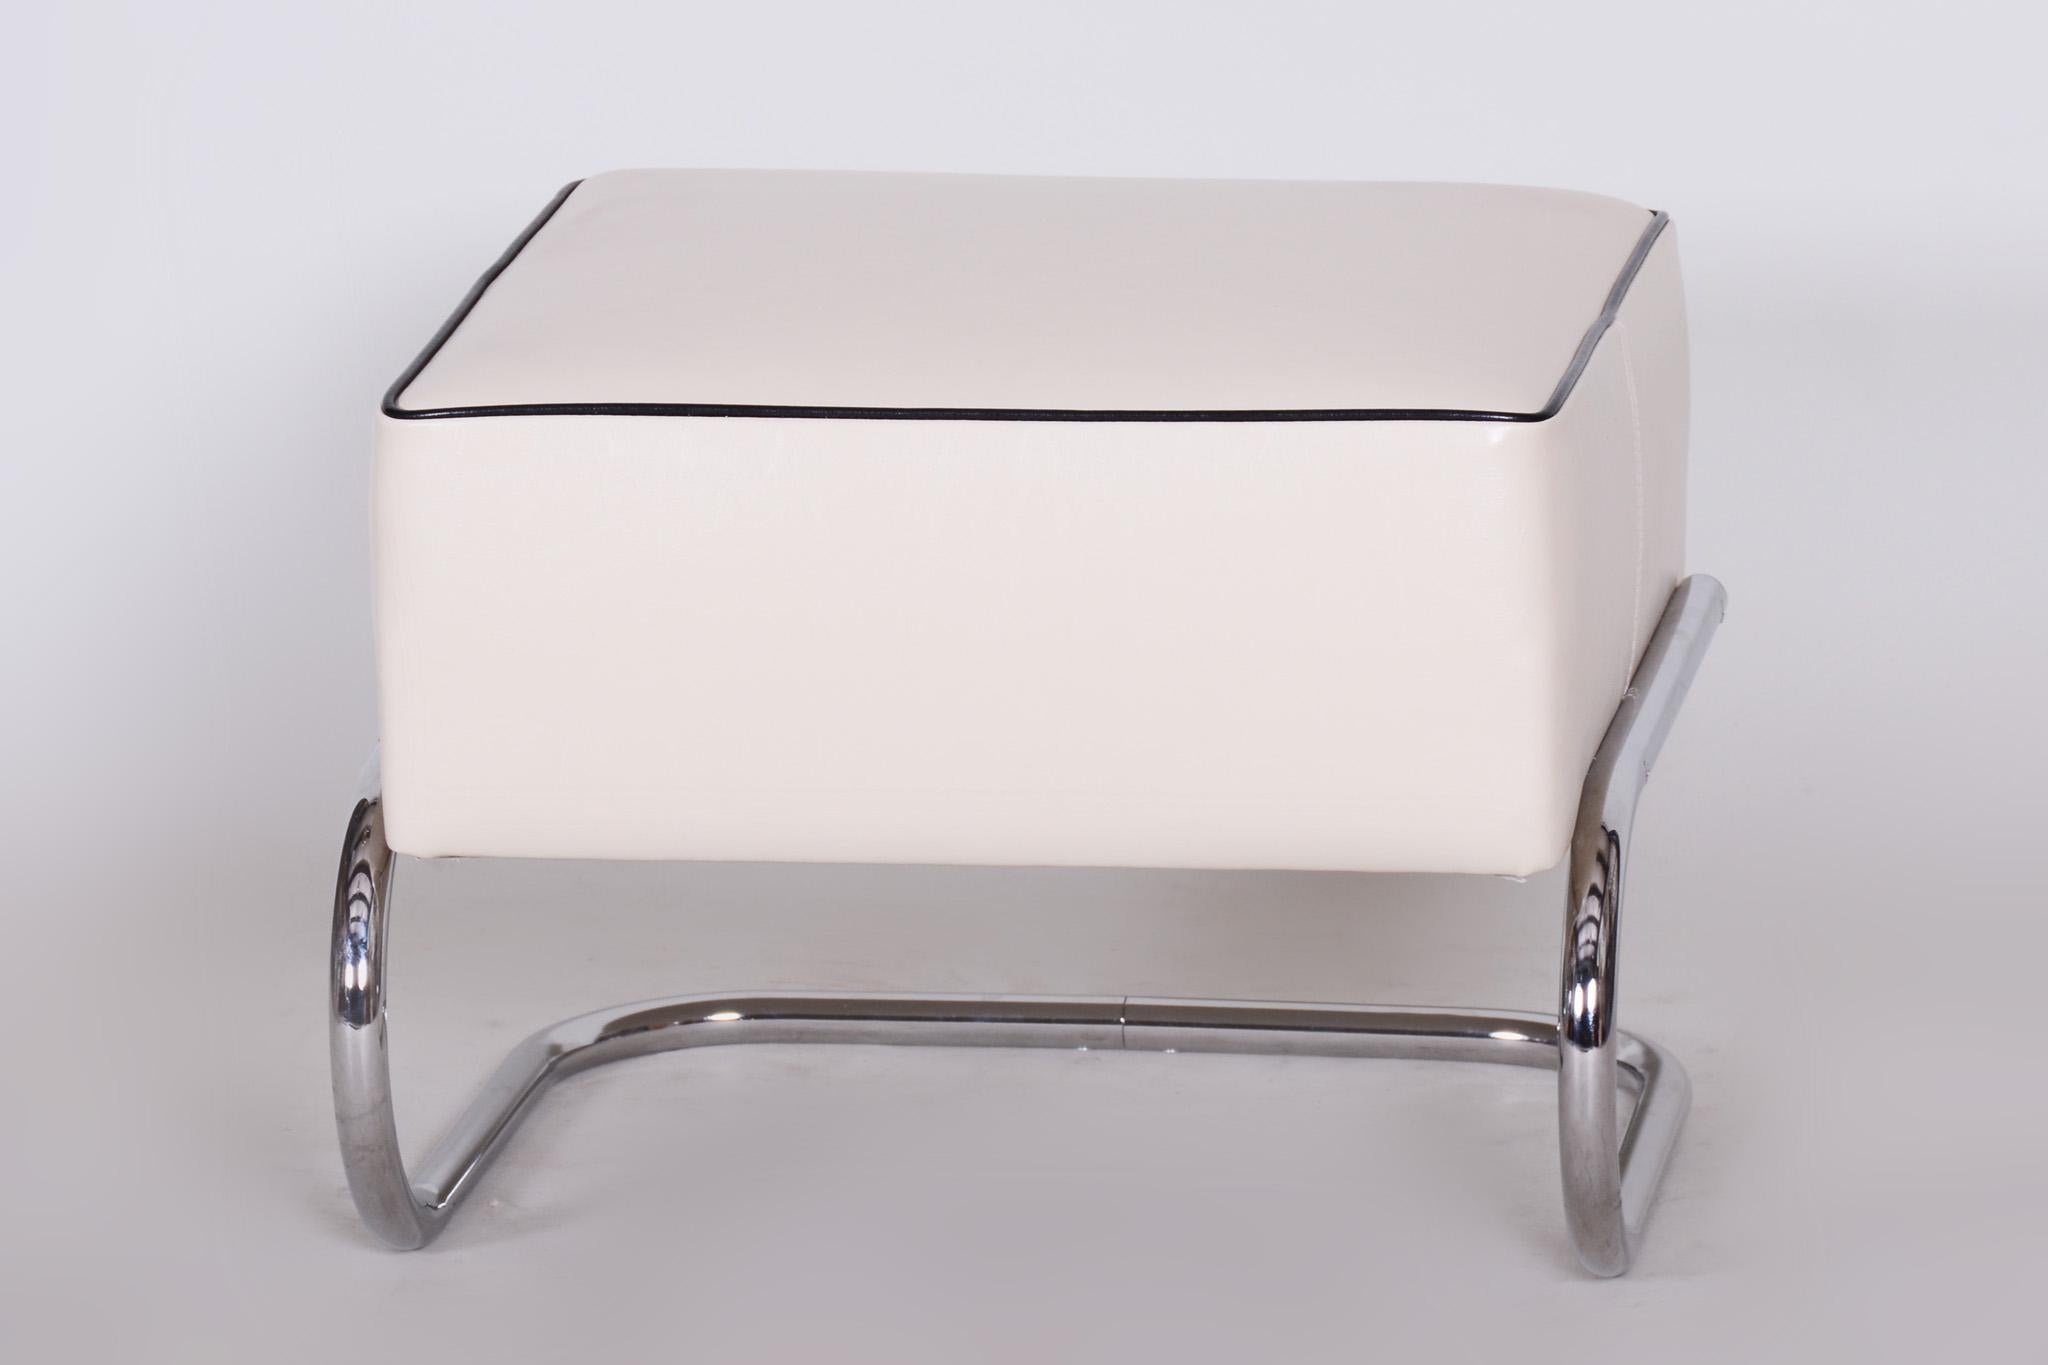 Modernist Bauhaus - Art Deco chrome tabouret.
Completely restored, new upholstery and leather.
Maker: Slezák Company
Source Czechia
Period: 1930-1939.